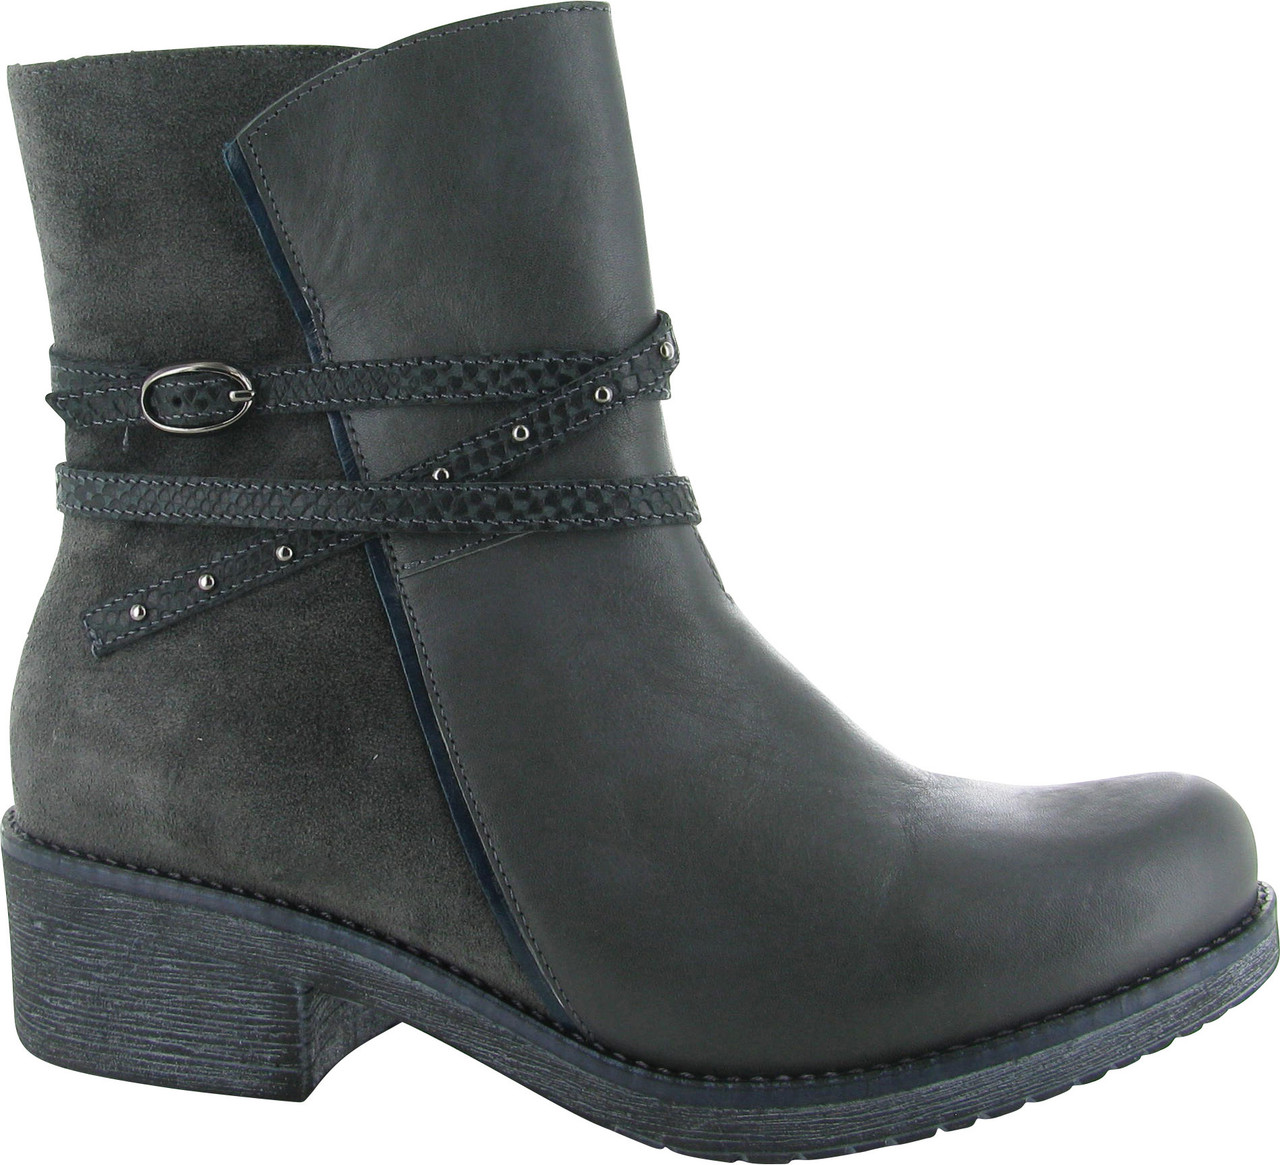 Naot Poet - FREE Shipping & FREE Returns - Women's Boots